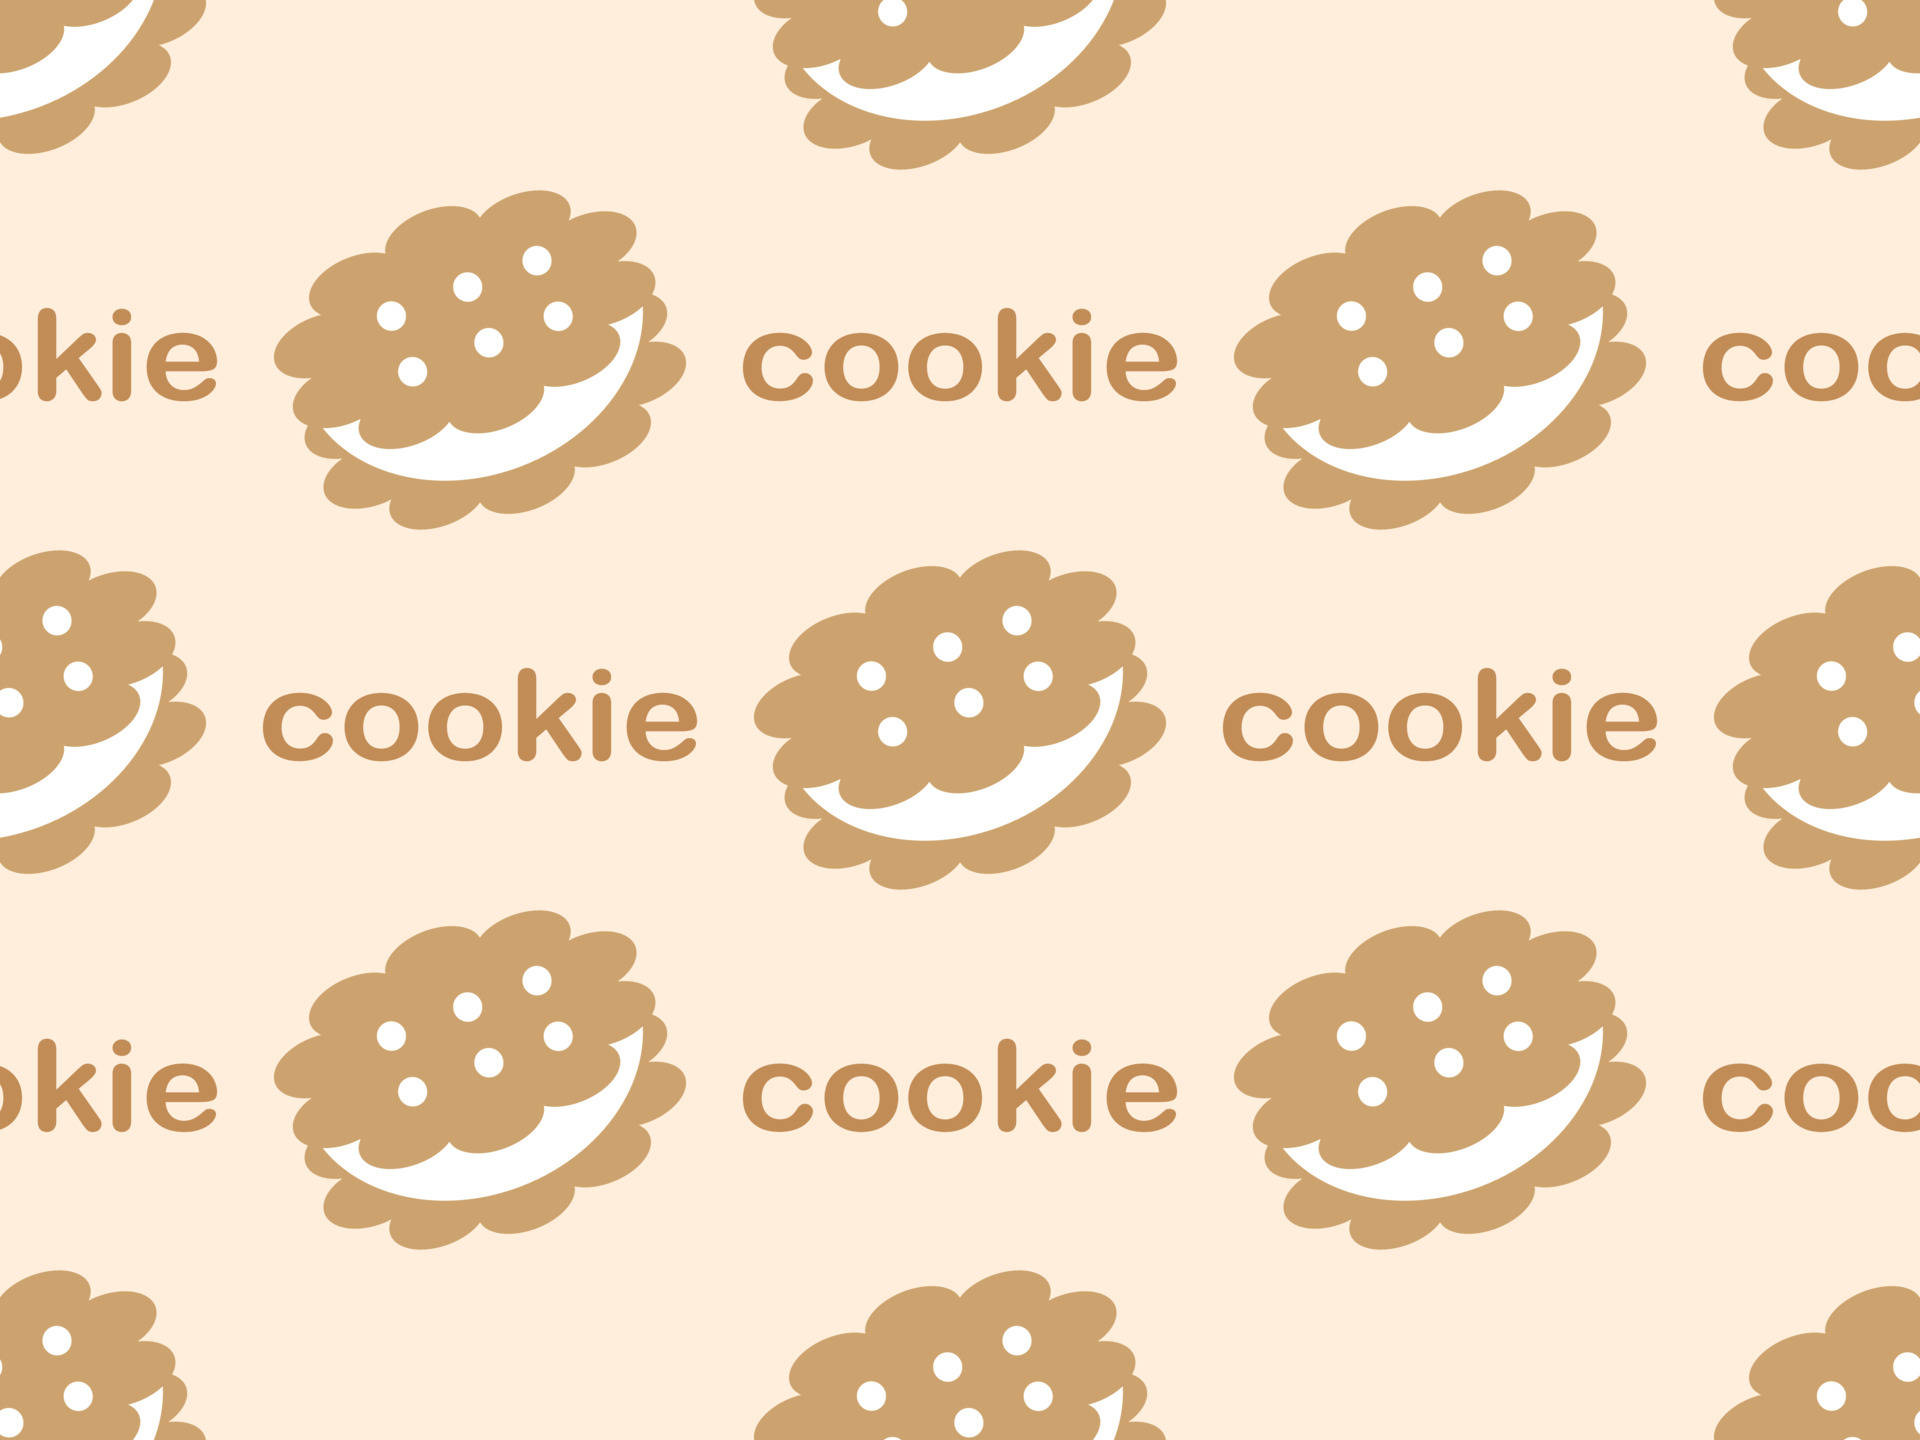 Cartoon Cookie With Cream Filling Wallpaper